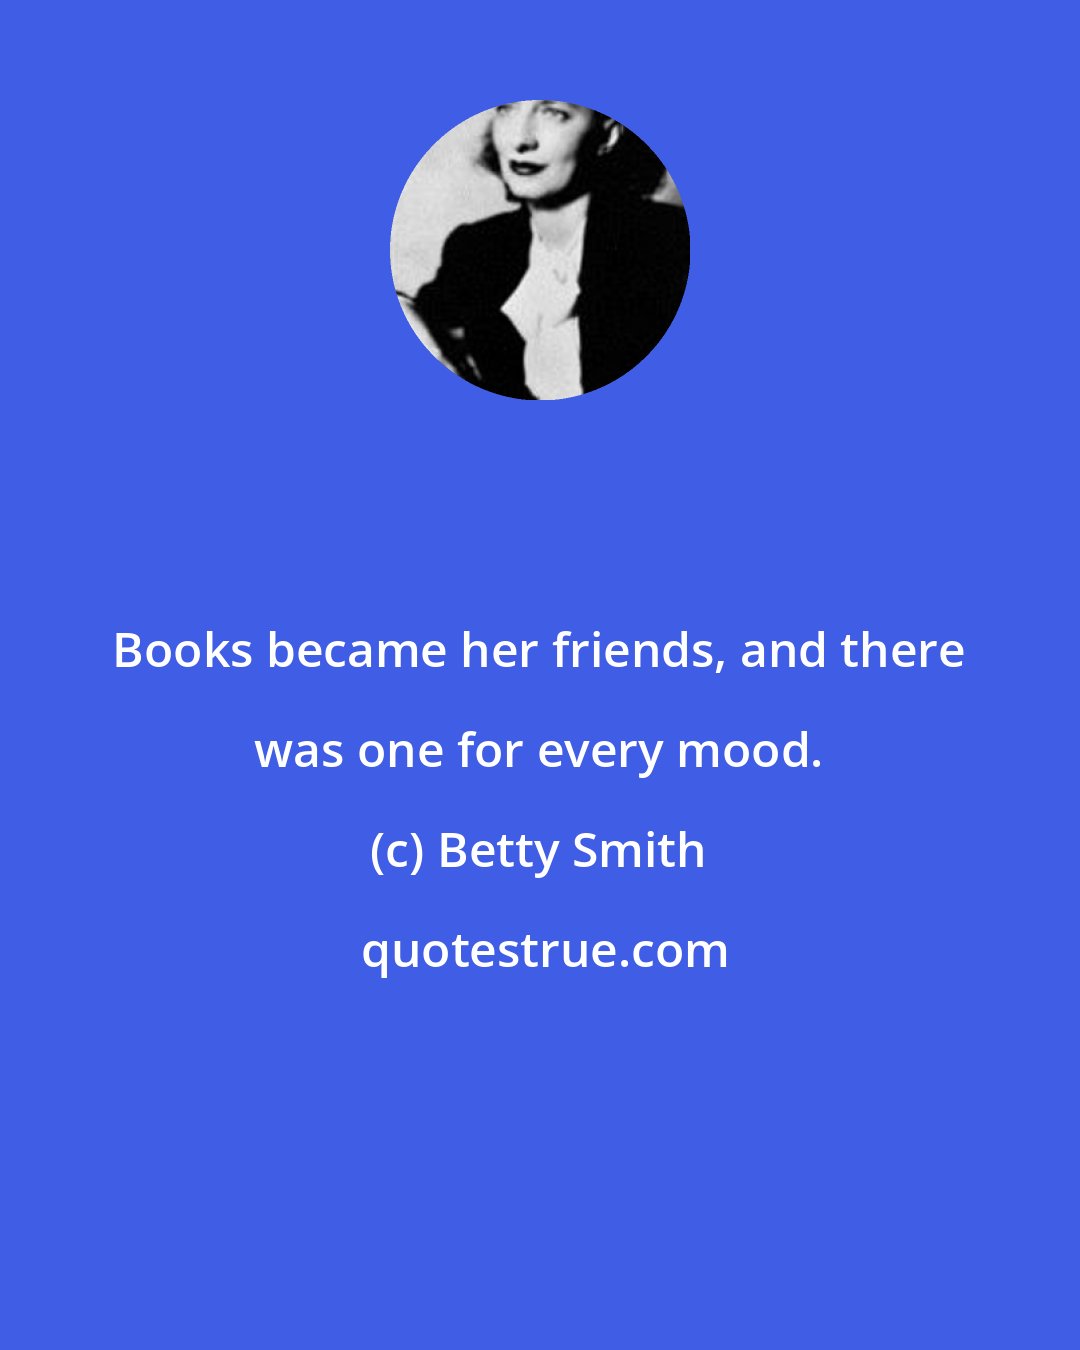 Betty Smith: Books became her friends, and there was one for every mood.